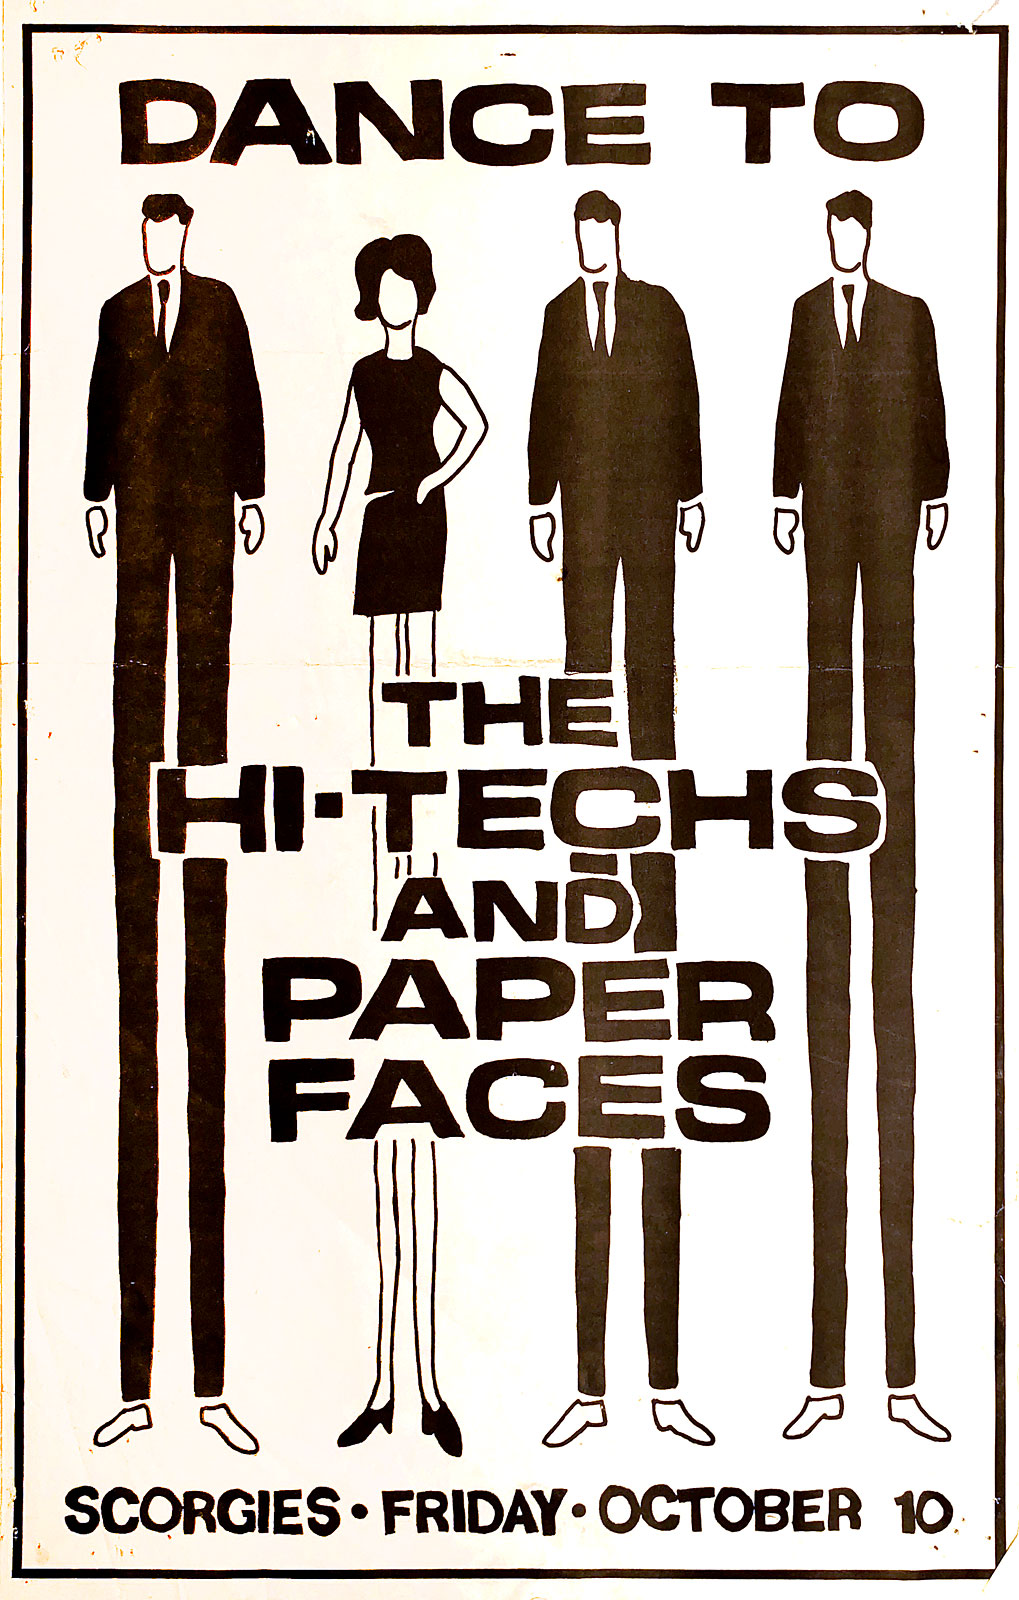 Poster for Hi-Techs and Paper Faces at Scorgies in Rochester, New York on 10.10.1980